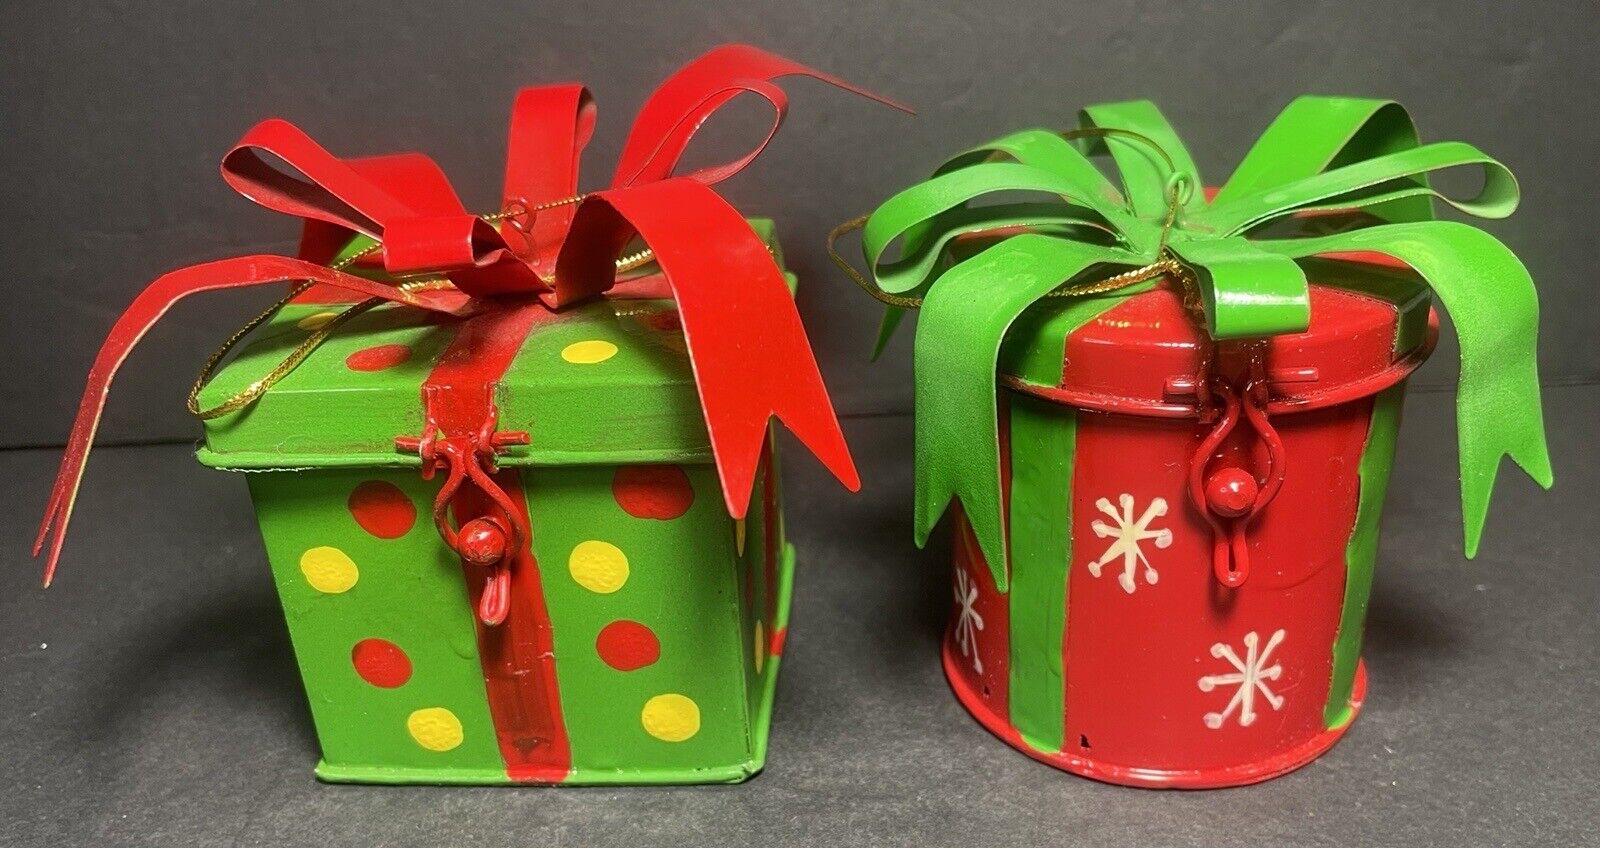 Red & Green Metal Hinged Gift Box Ornaments Square Round Ribbons Bows Trinket